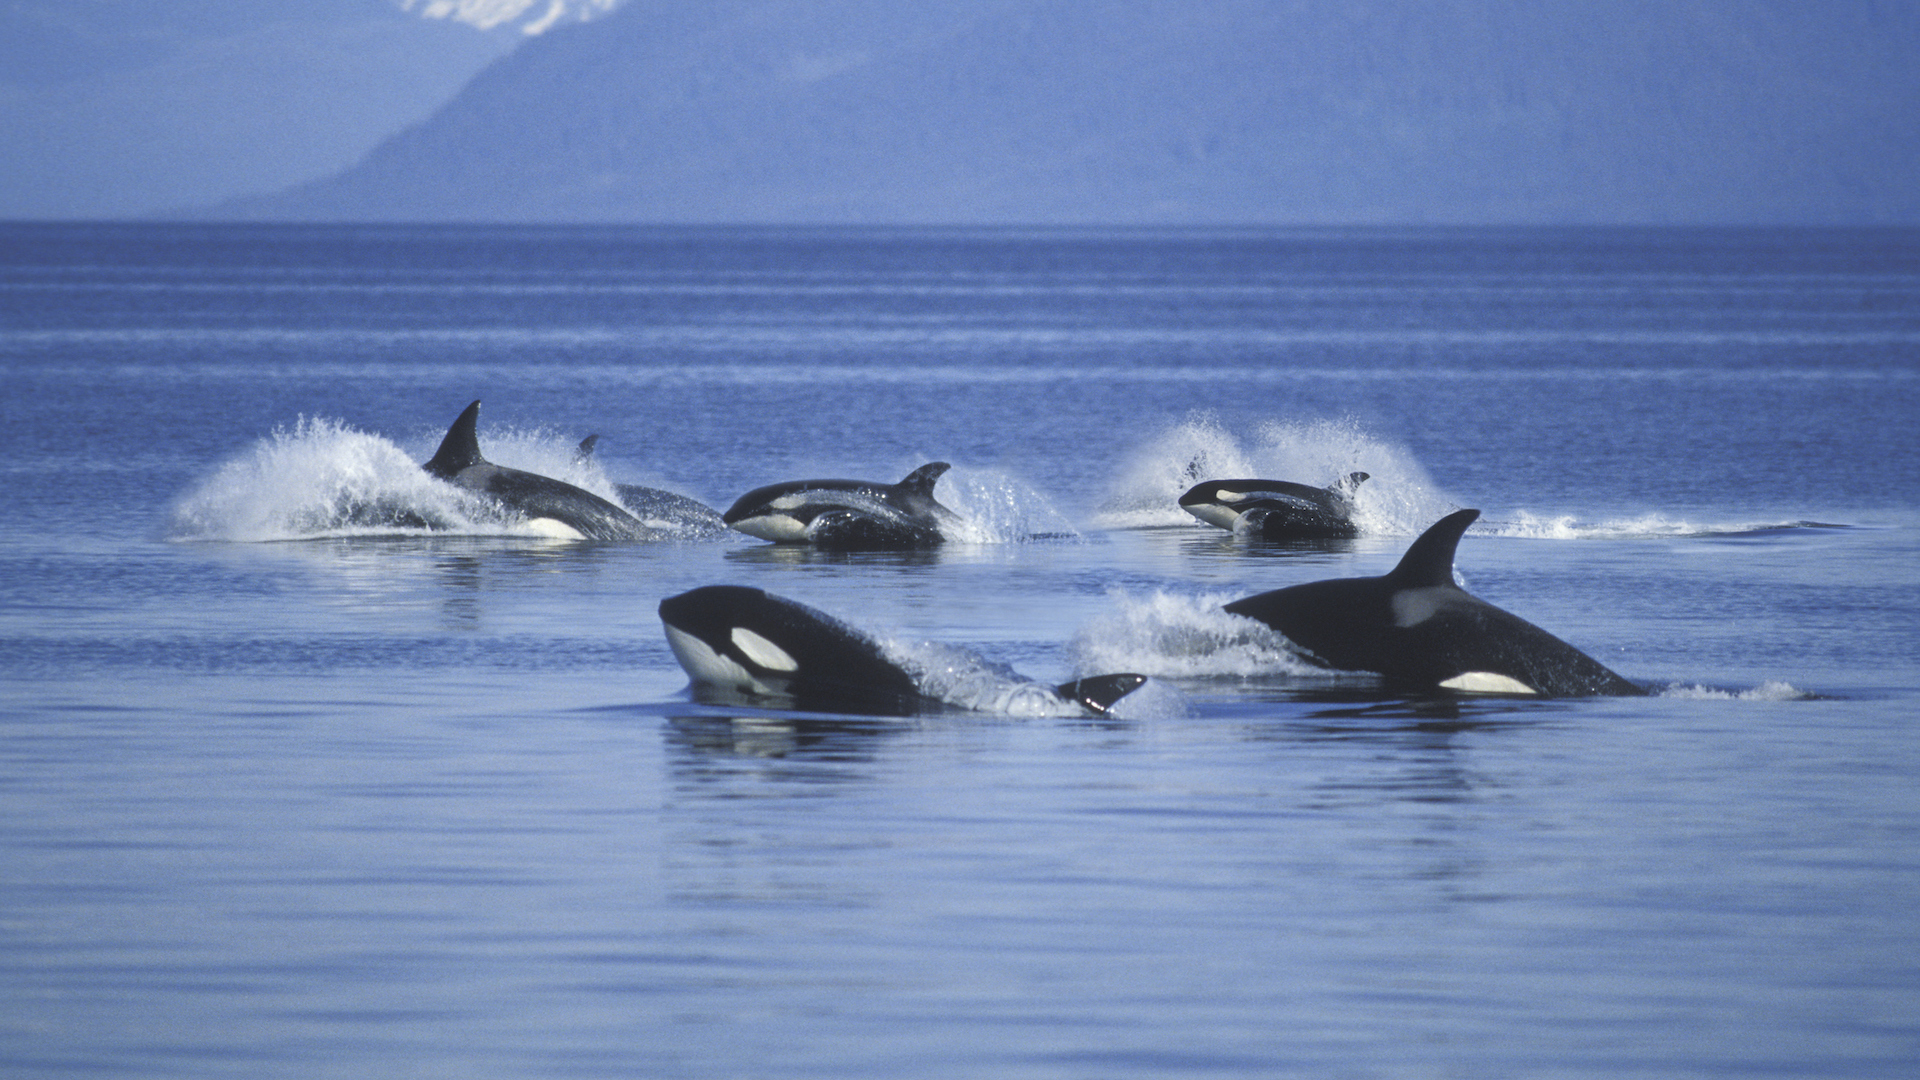 A photograph of a pod of killer whales jumping from the water  with icy mountains in the background